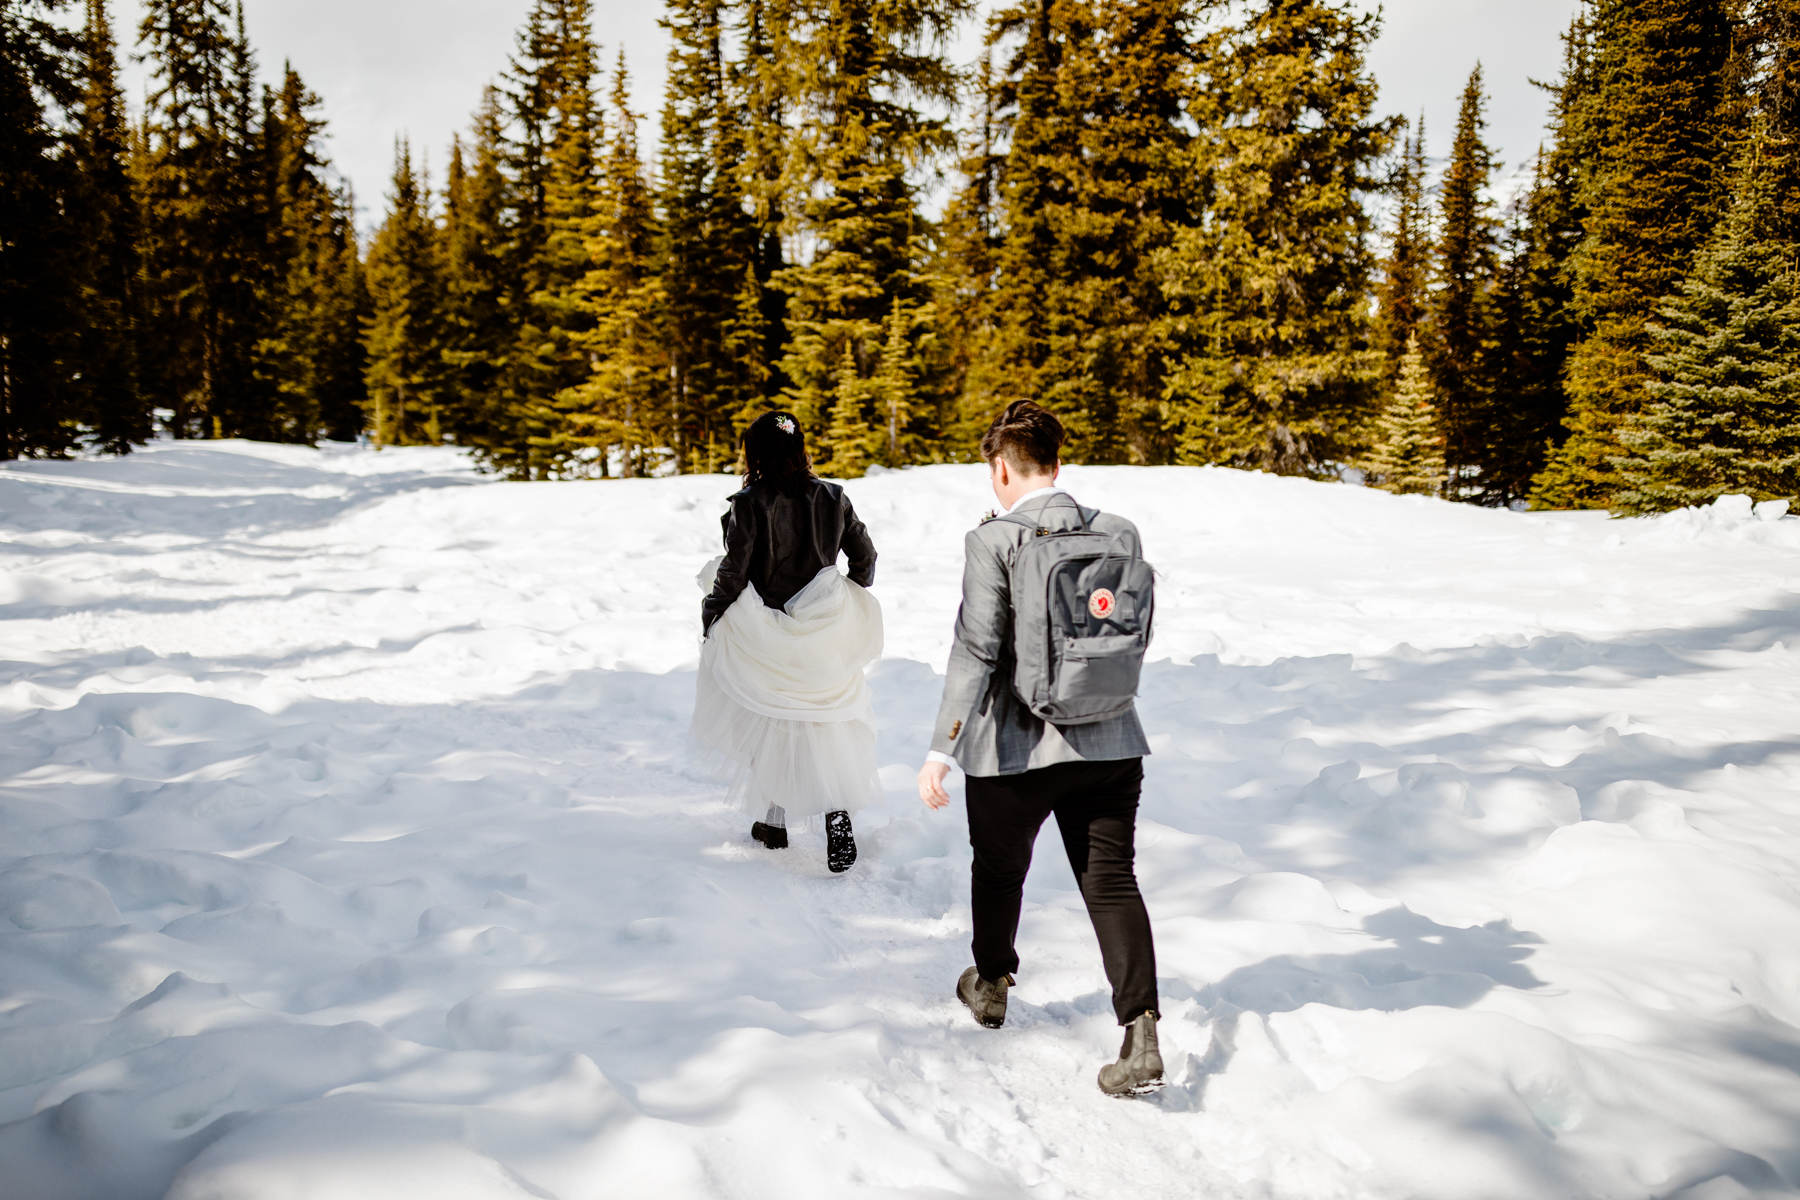 Banff National Park Elopement Photography with LGBTQ-friendly photographers - Image 4